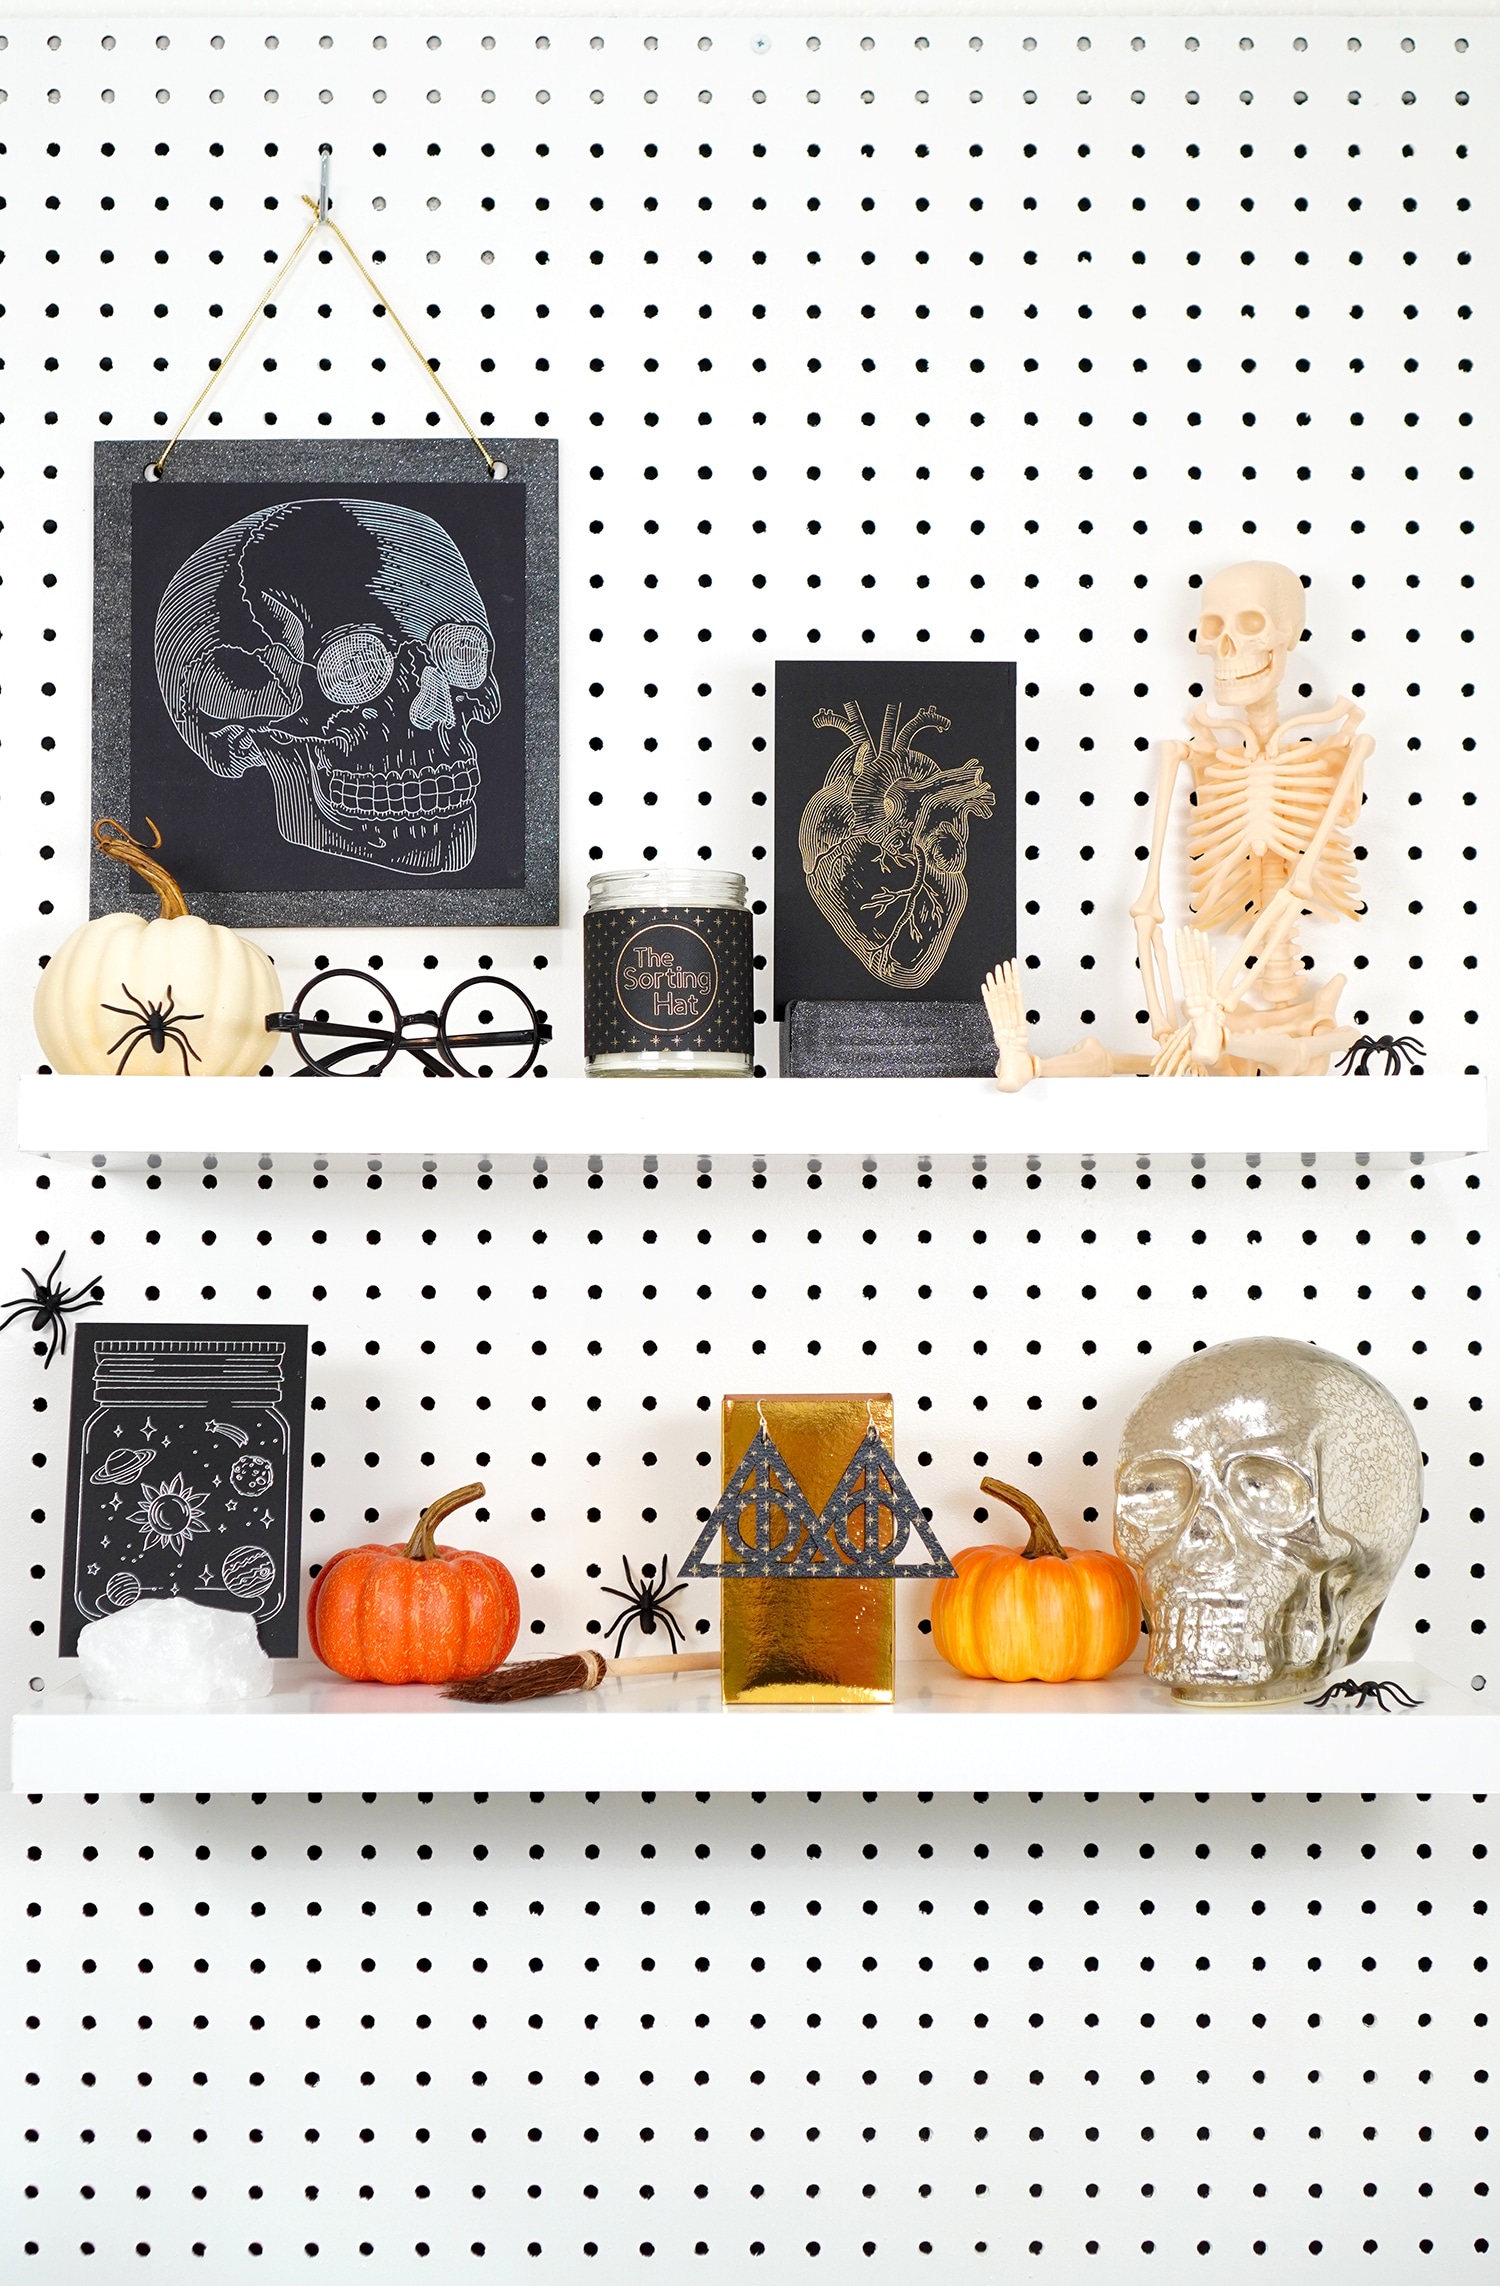 Shelves decorated with Halloween props and Halloween foil art prints